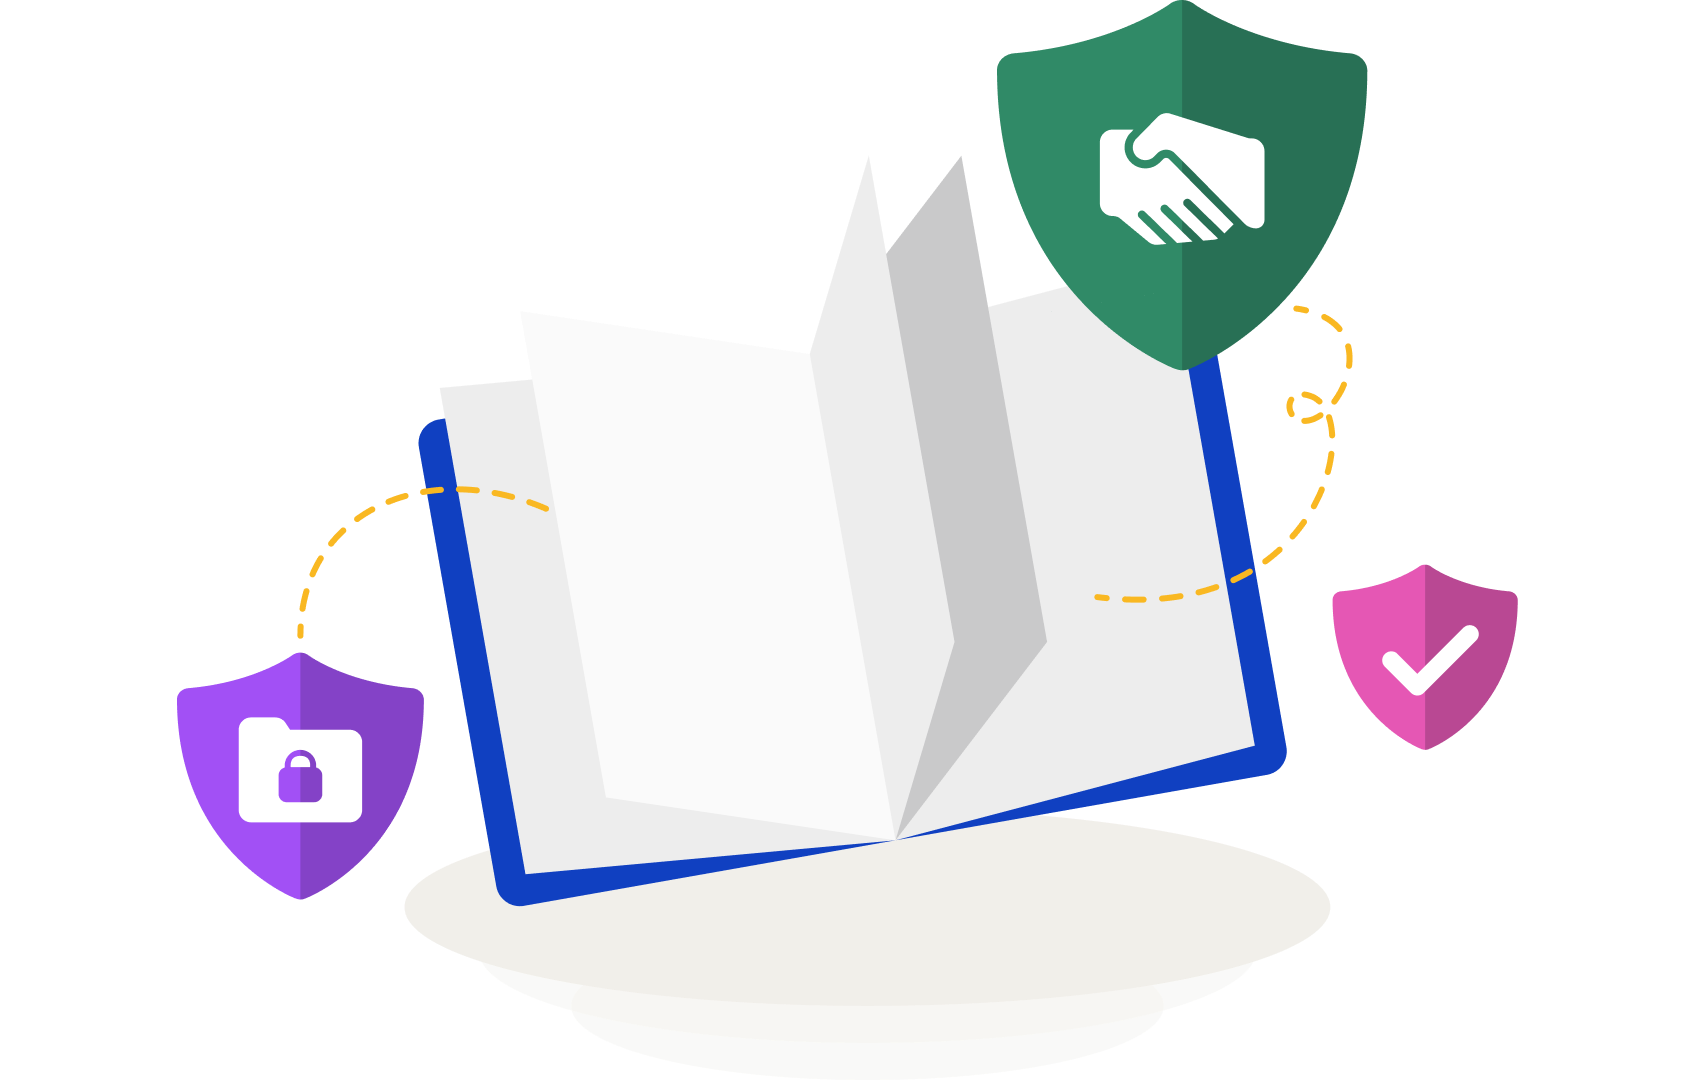 Icons with a shield and handshake symbol float near an illustration of an open book